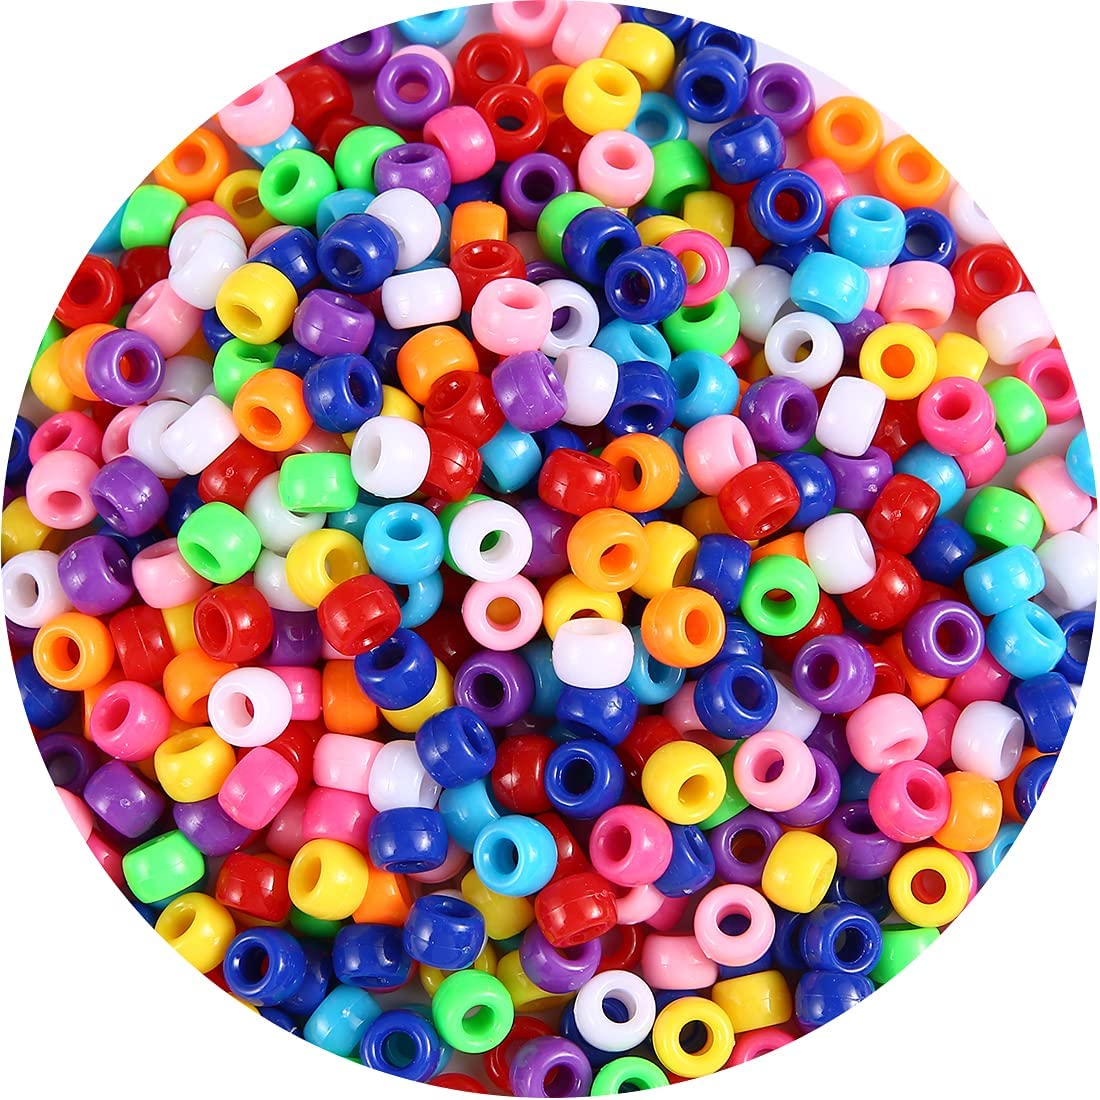 Eppingwin 1000+ Pcs Pony Beads Multi-Colored Bracelet Beads for Hair Braids Crafts Plastic Beads (Medium Pack Classic)